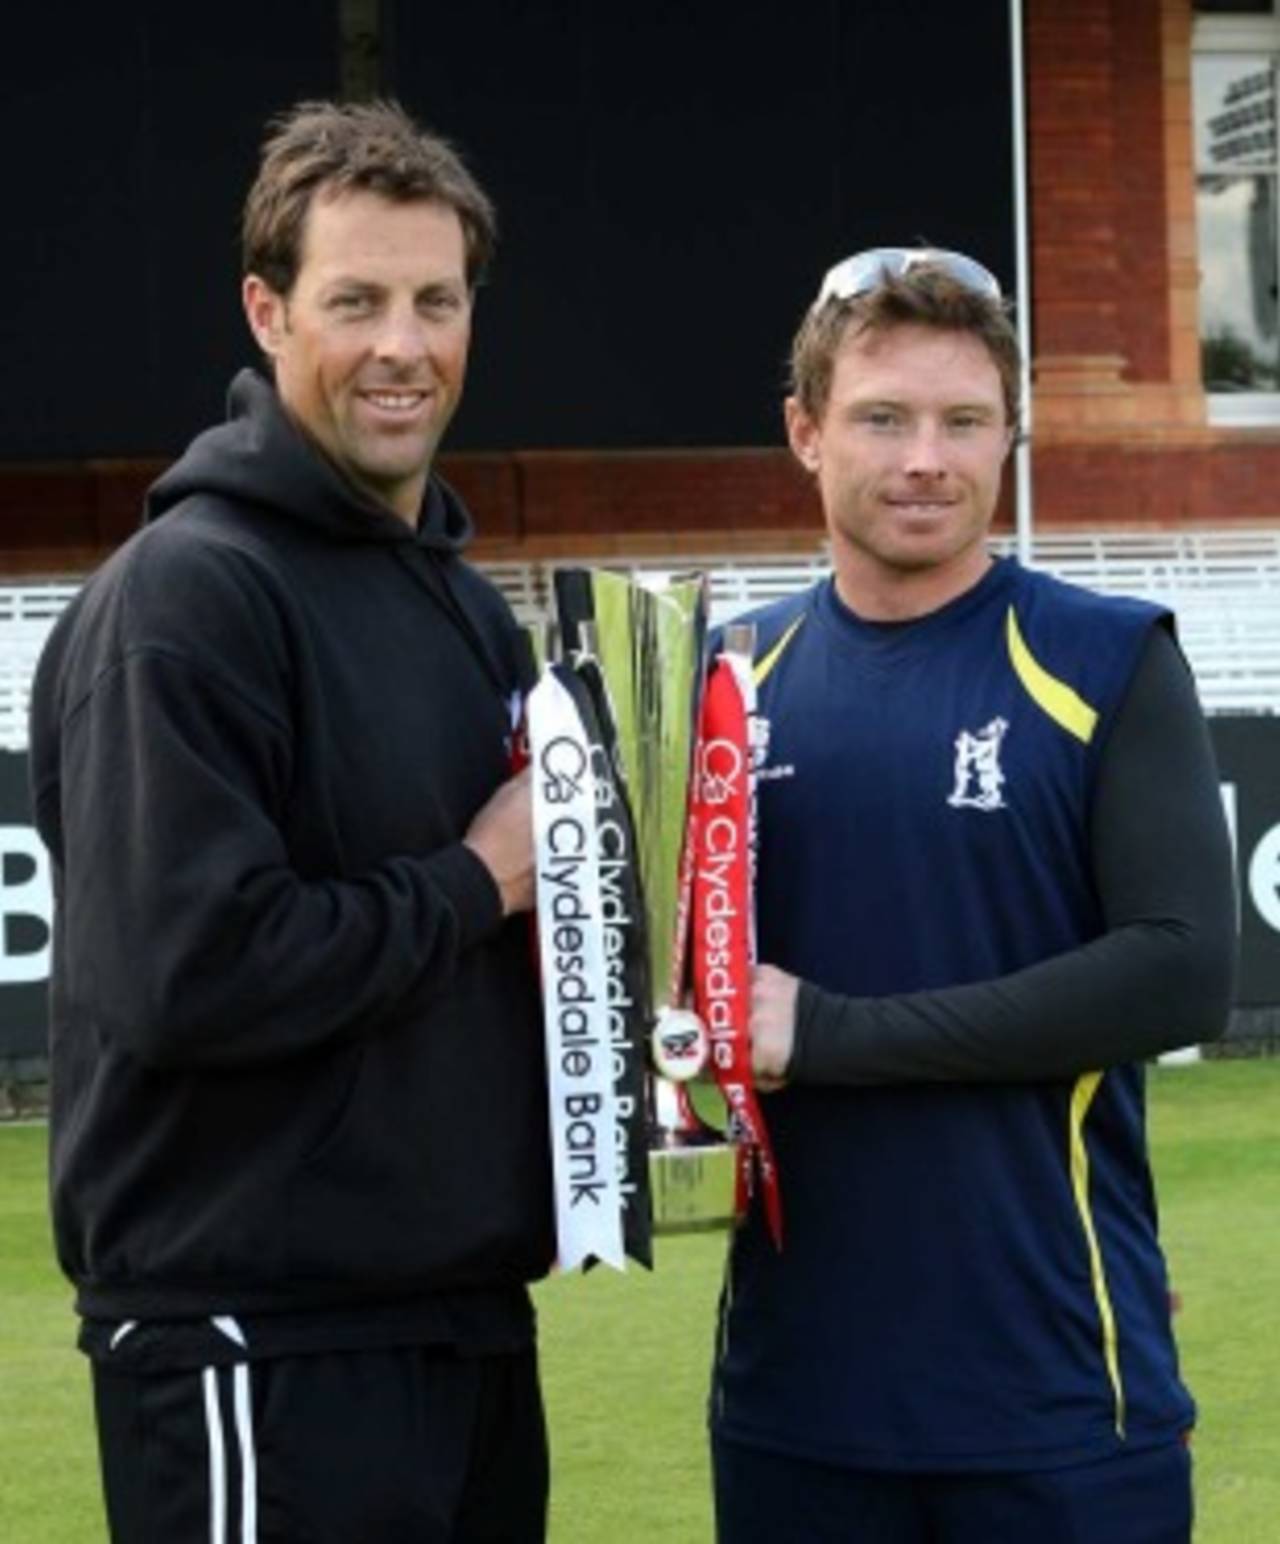 Marcus Trescothick and Ian Bell with the Clydesdale Bank 40 trophy, Somerset v Warwickshire, CB40 final, Lord's, September 17, 2010